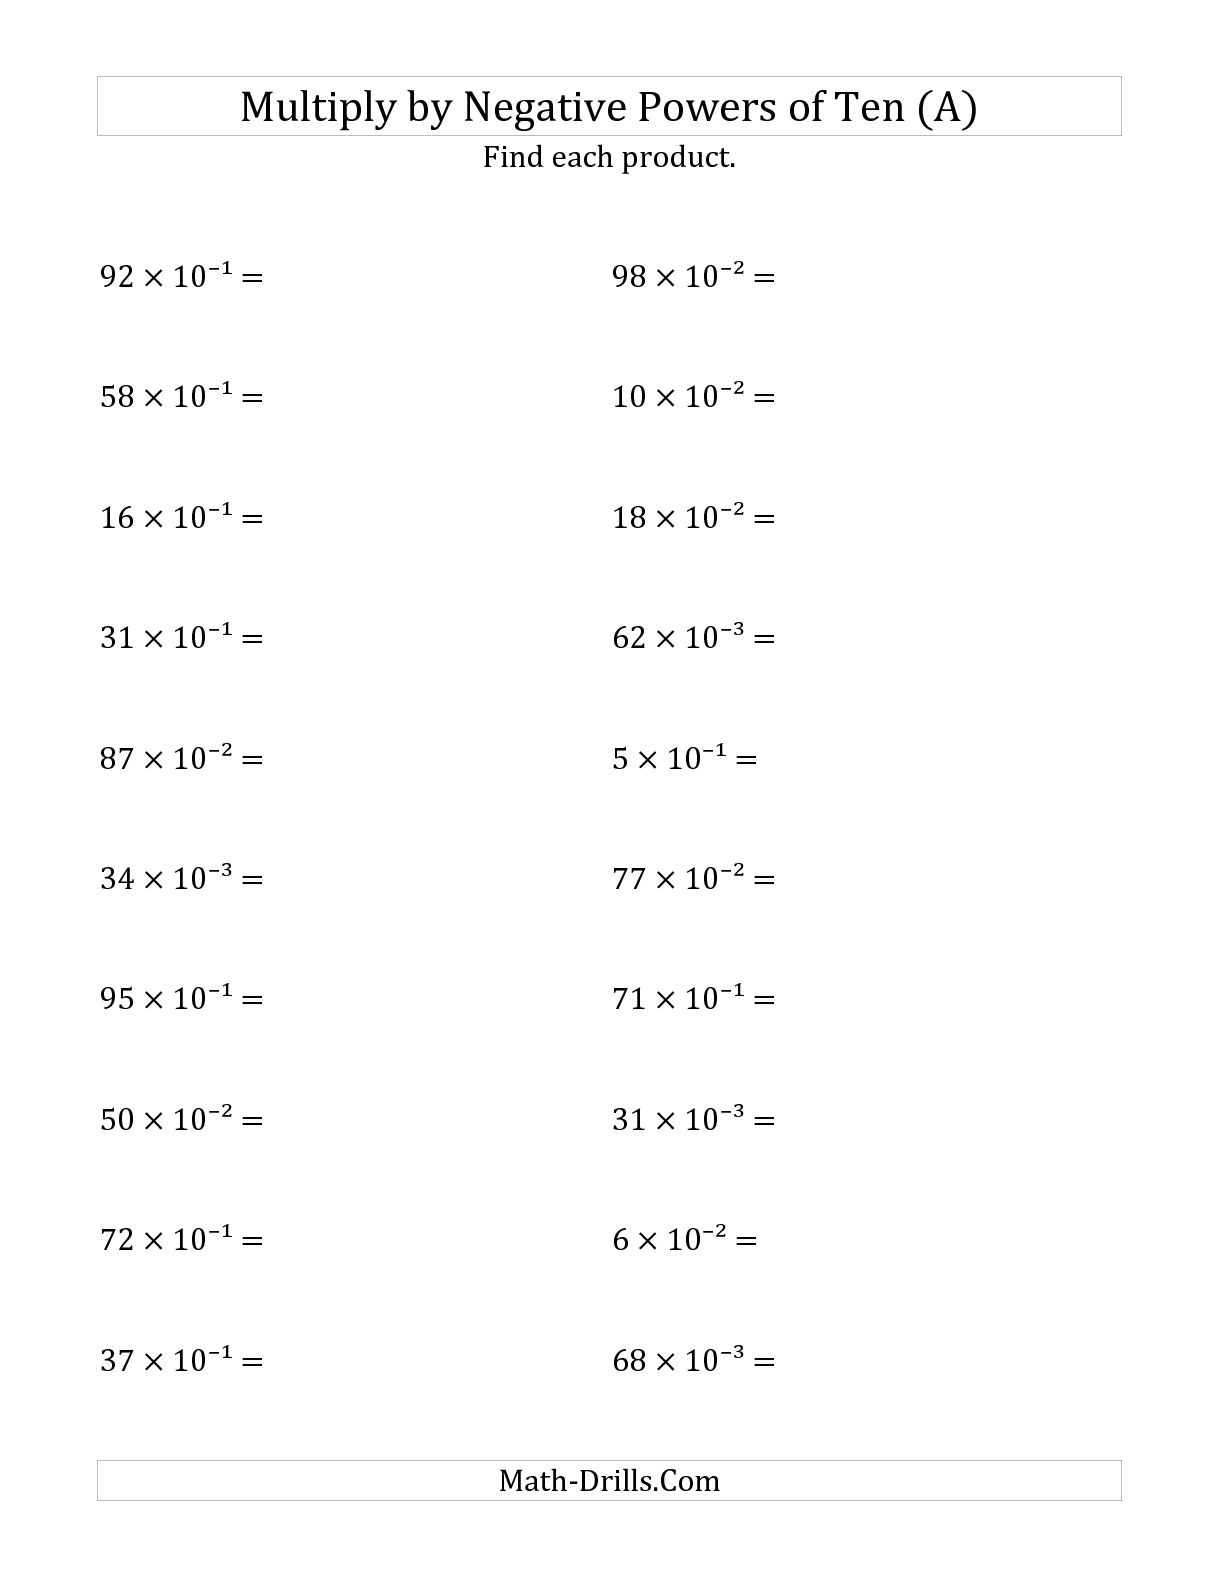 Negative Numbers With Exponents Worksheet